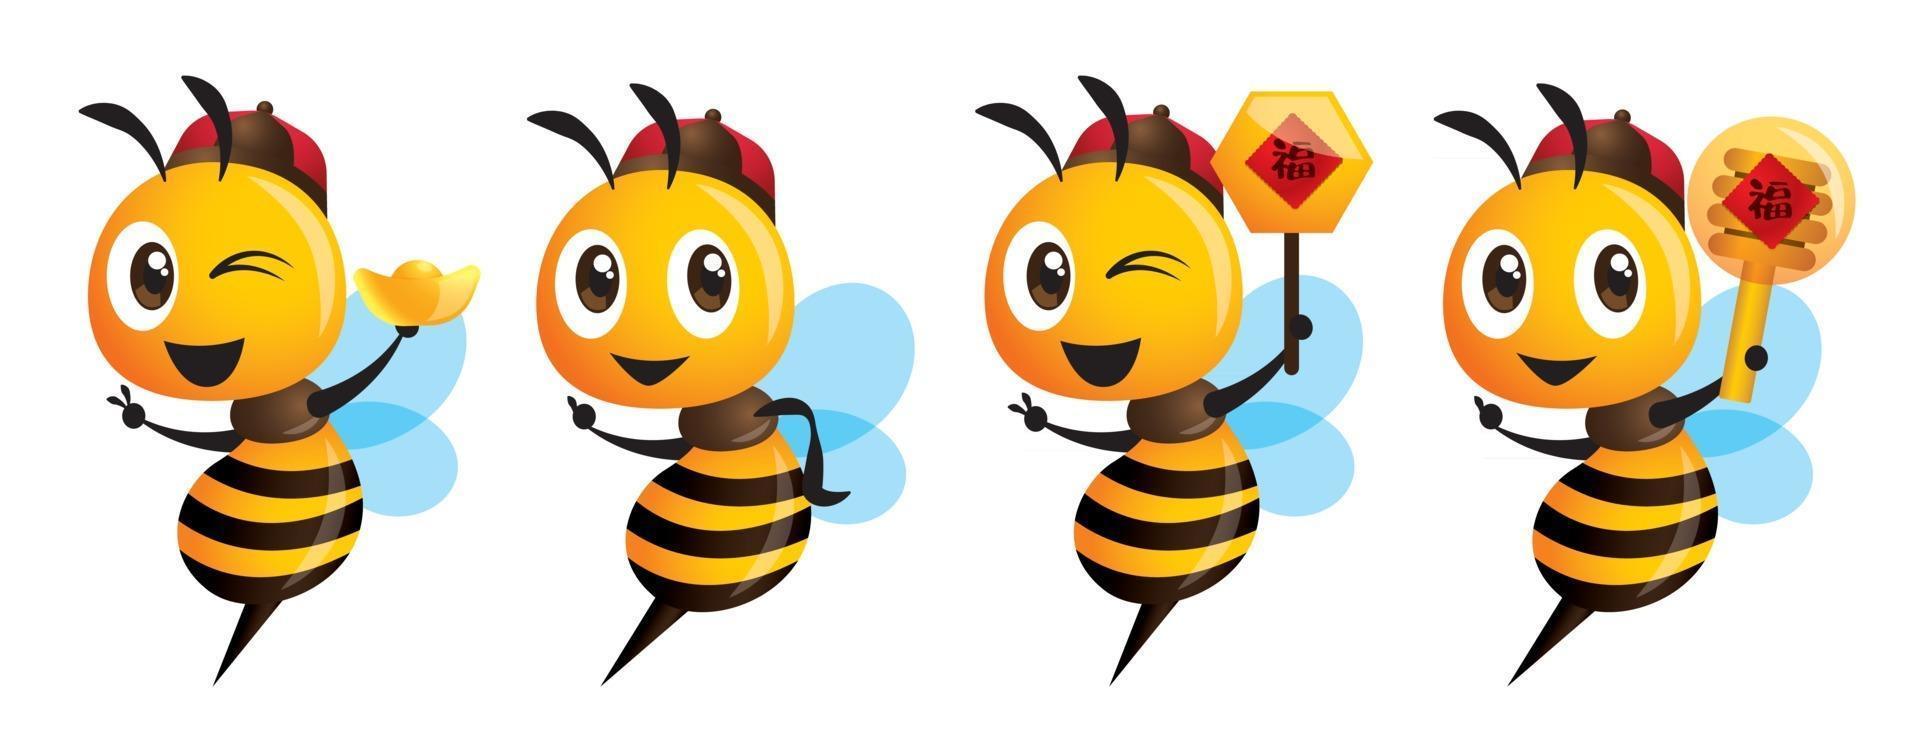 Cartoon cute bee holding gold ingot and honey dipper to celebrate Chinese New Year vector